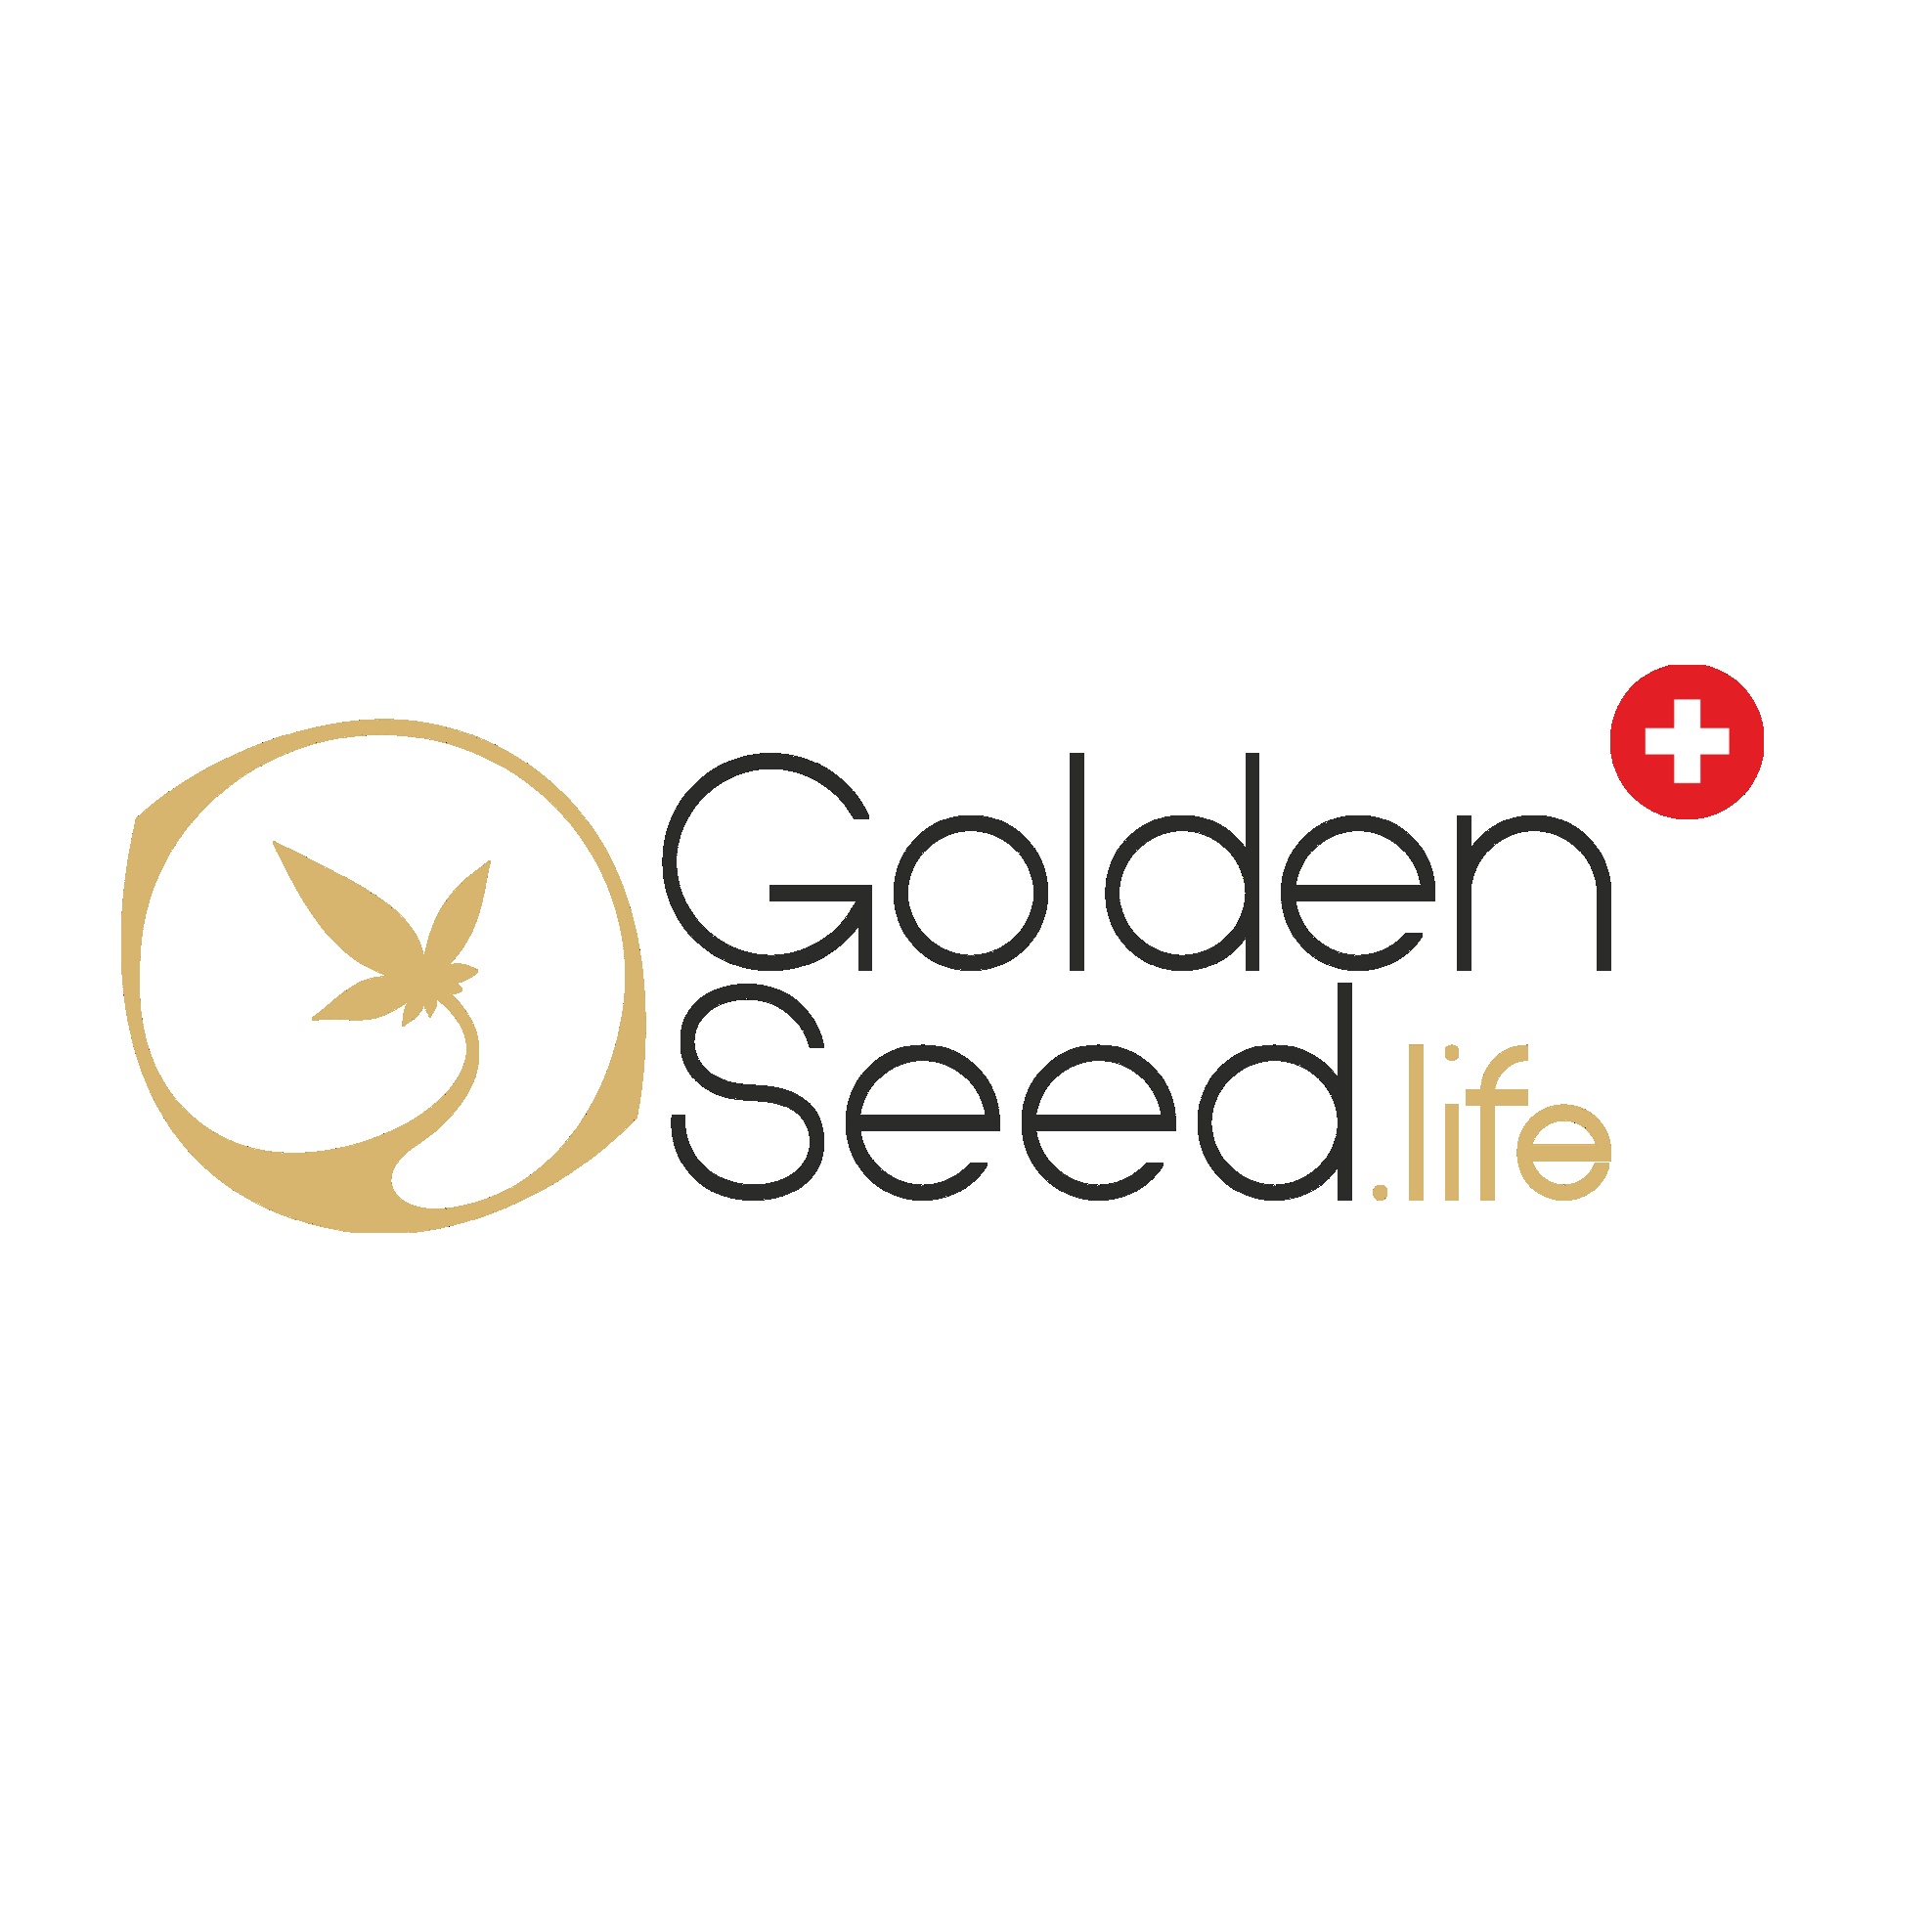 Golden Seed.Life